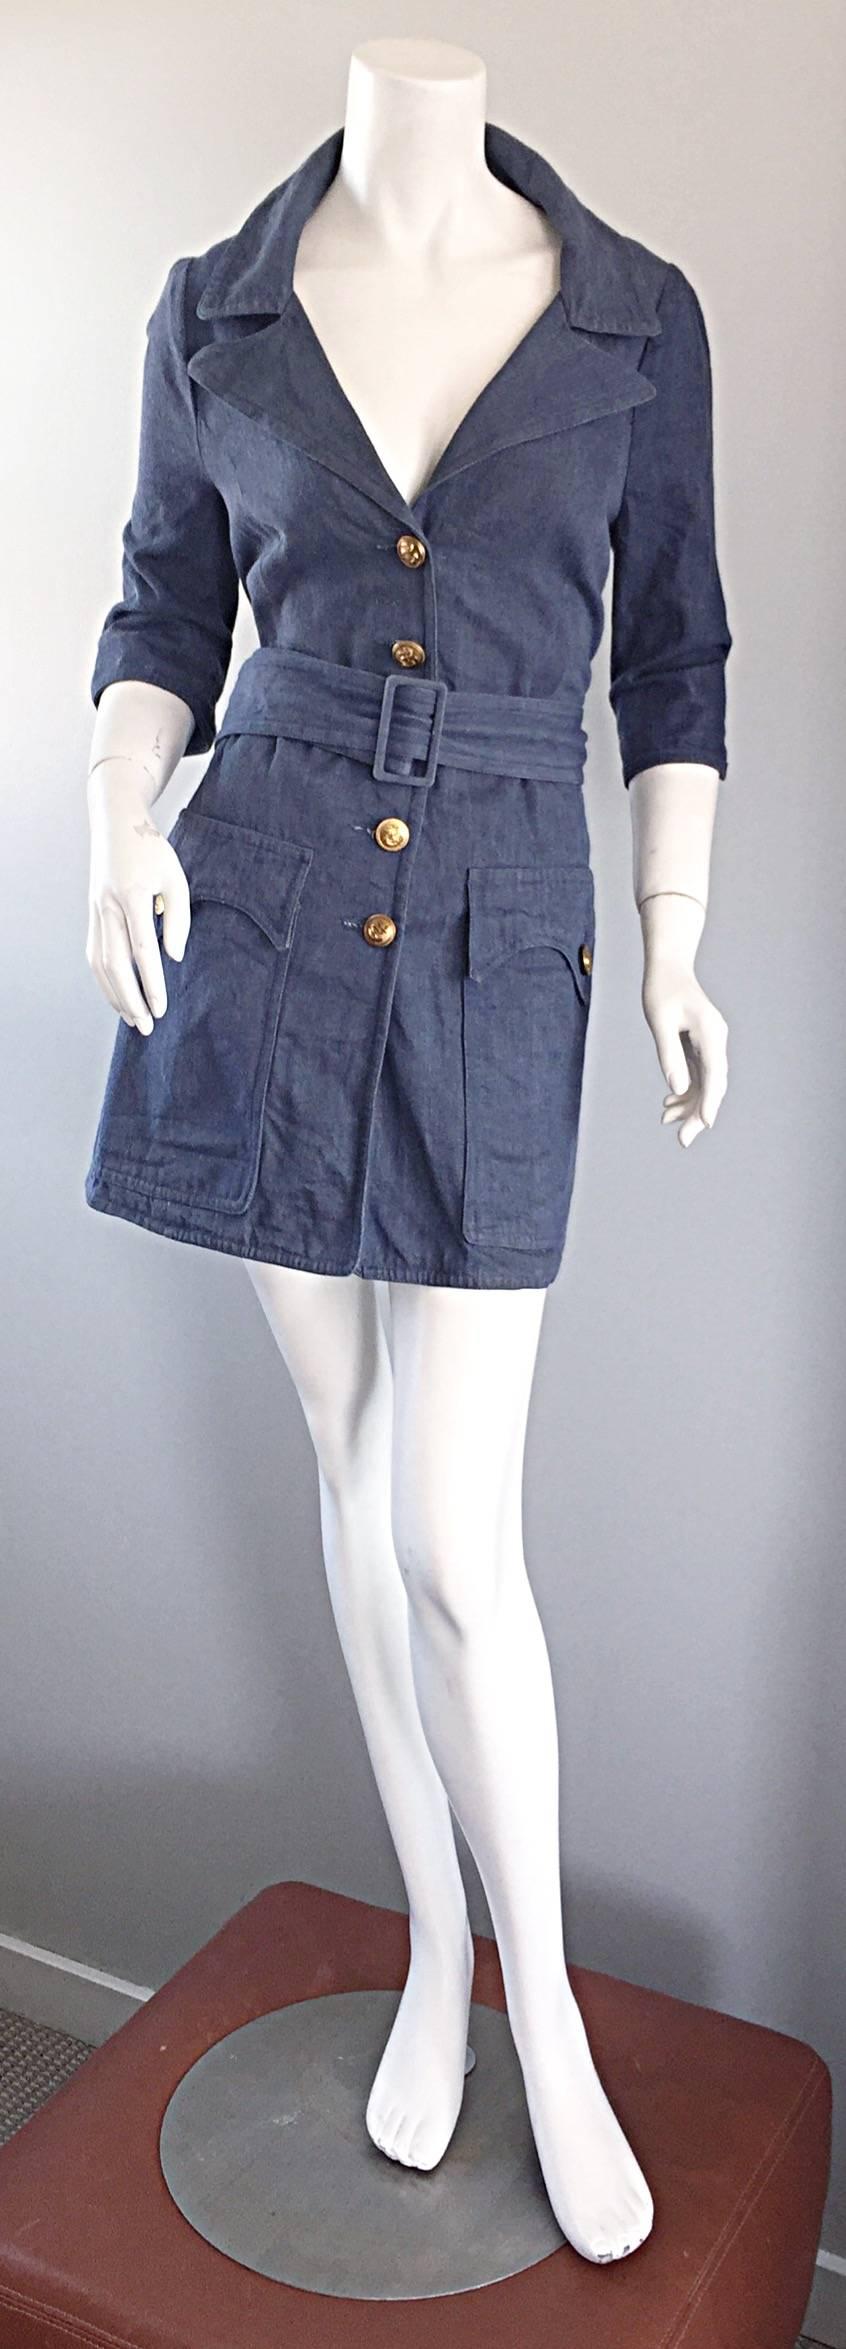 Rare and collectible vintage BIBA 1970s denim / blue jean 3/4 sleeves nautical trench jacket or mini dress w/ detachable belt! Features gold anchor buttons down the bodice, and at each waist pocket. Fantastic tailored fit, and soft yet substantial